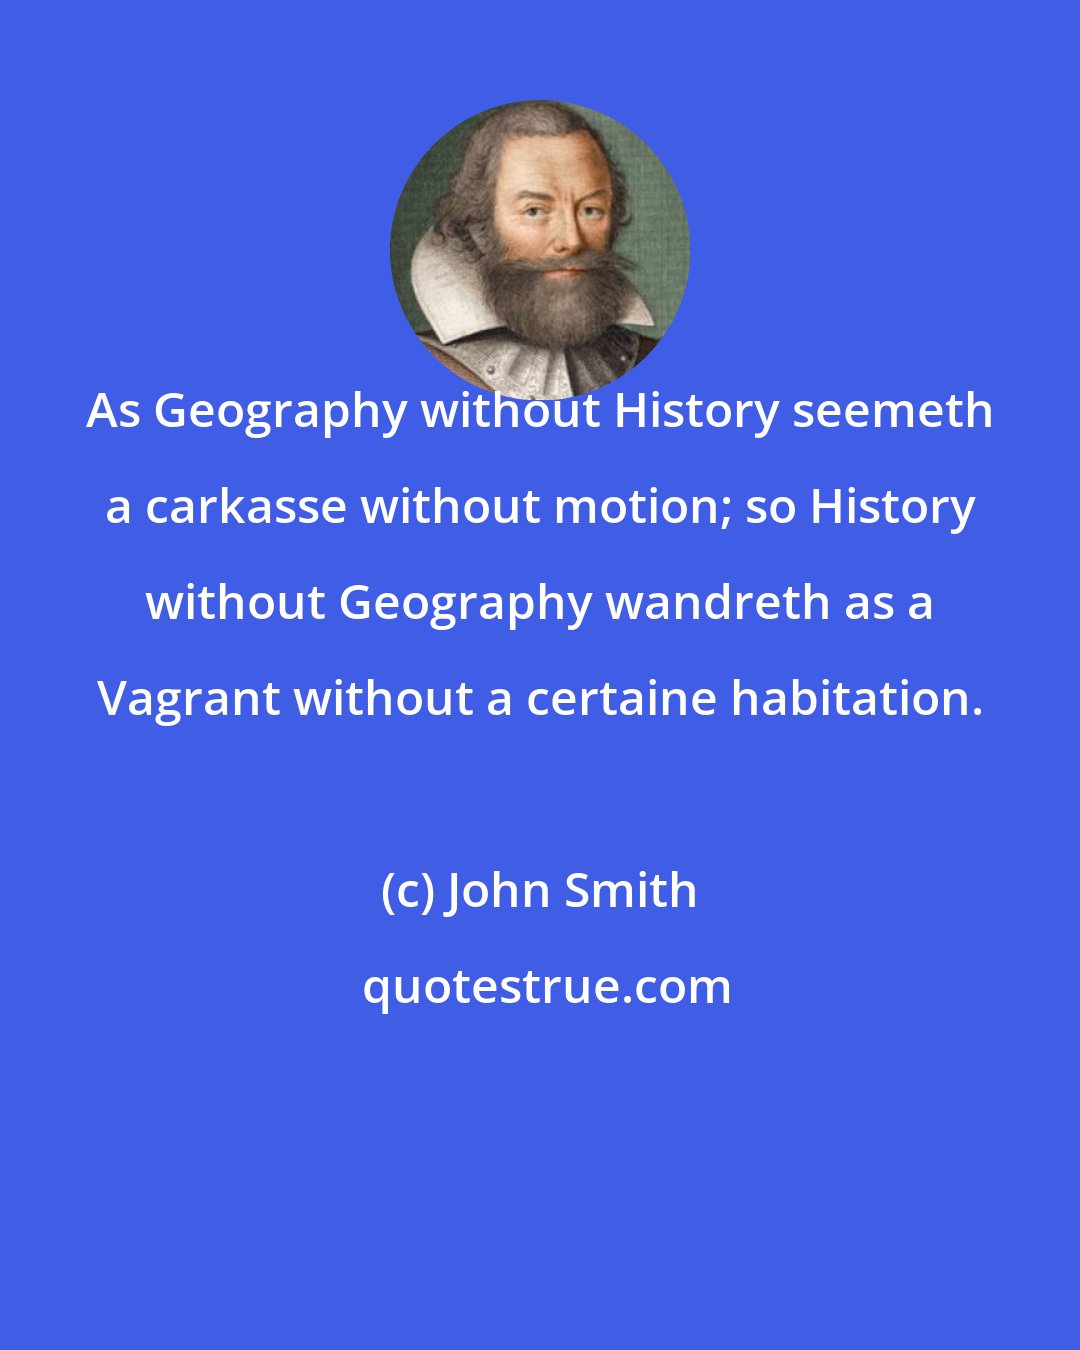 John Smith: As Geography without History seemeth a carkasse without motion; so History without Geography wandreth as a Vagrant without a certaine habitation.